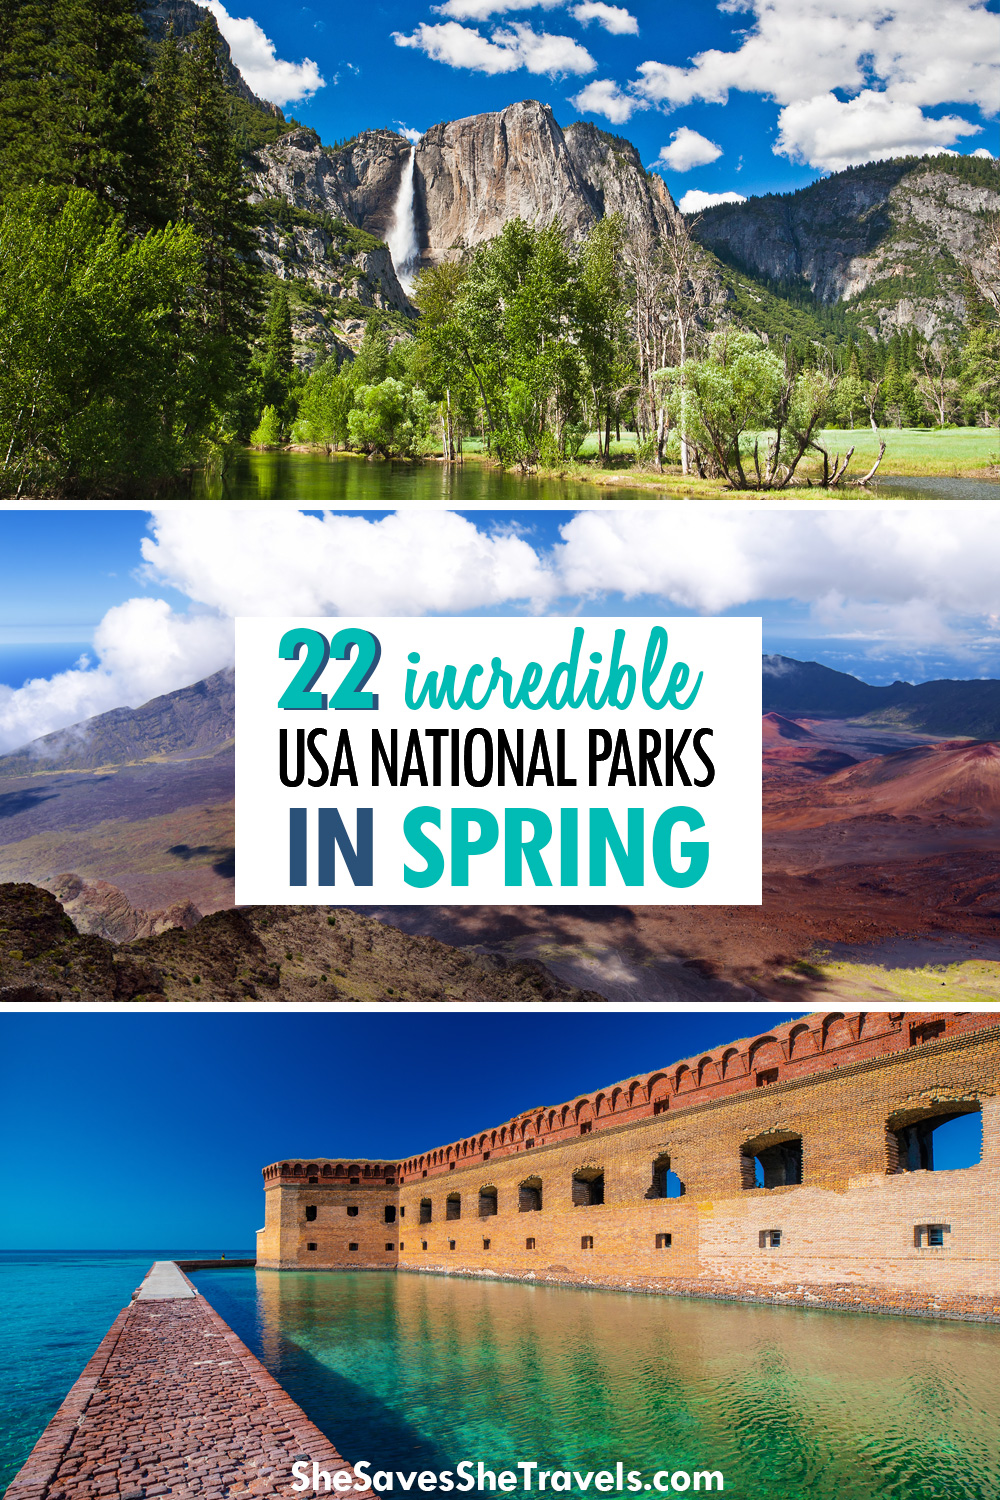 22 incredible usa national parks in spring 3 photos mountains top, crater center, walkway and fort on water on bottom